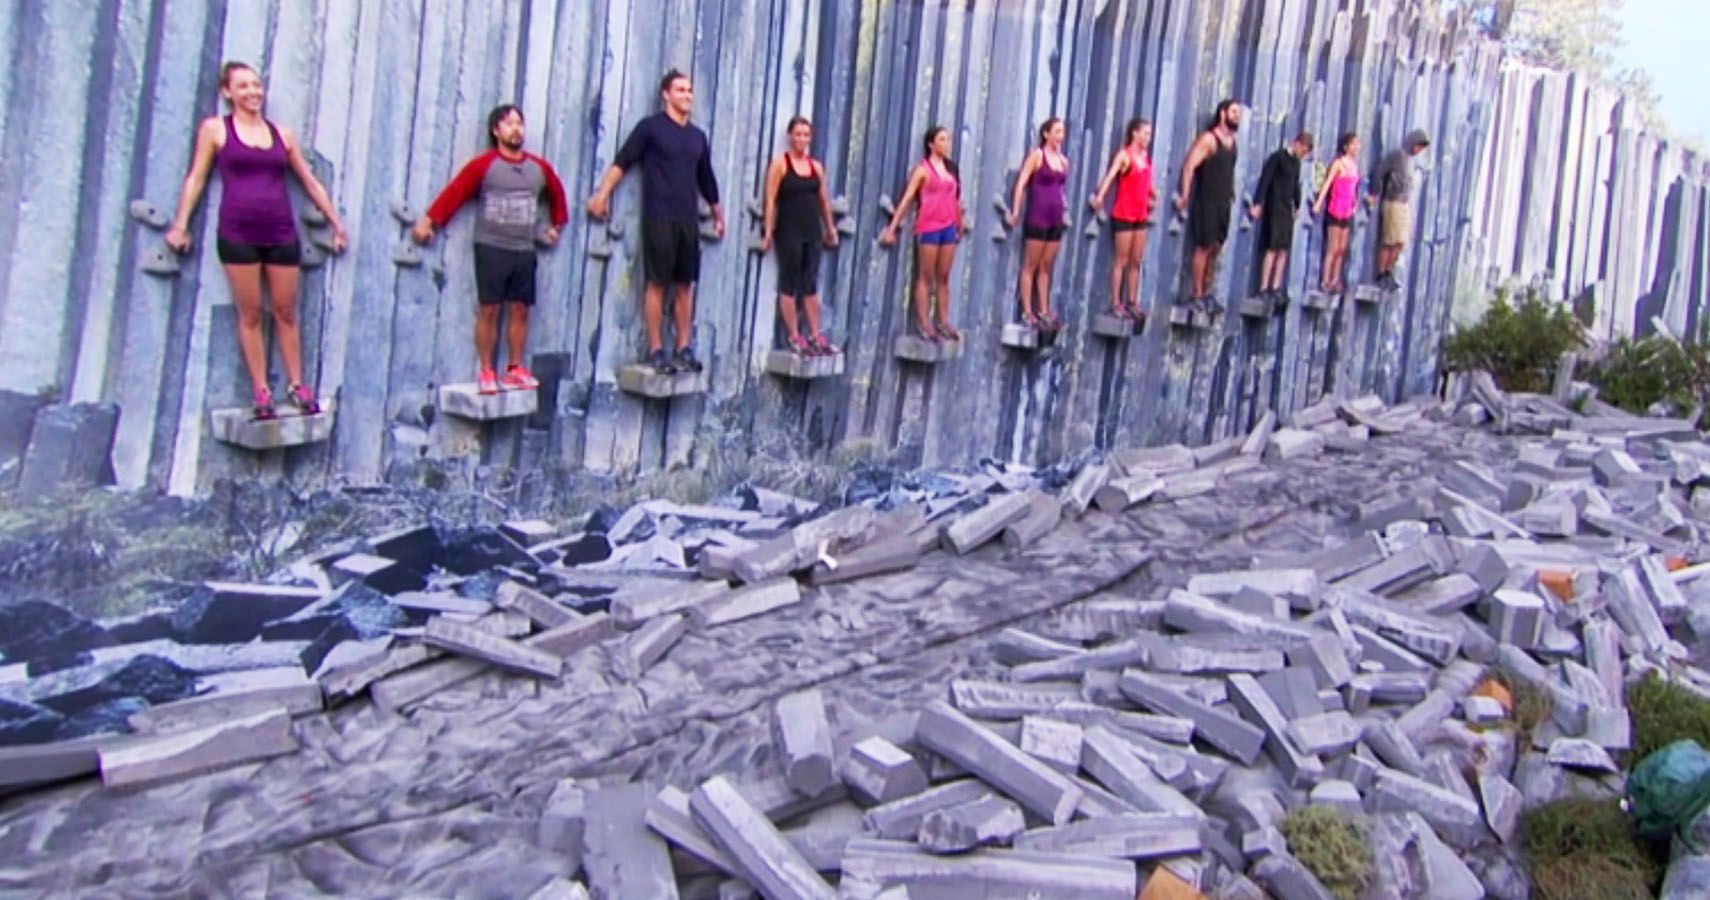 Players on Big Brother leaning against a wall, standing on a platform in an endurance competition.